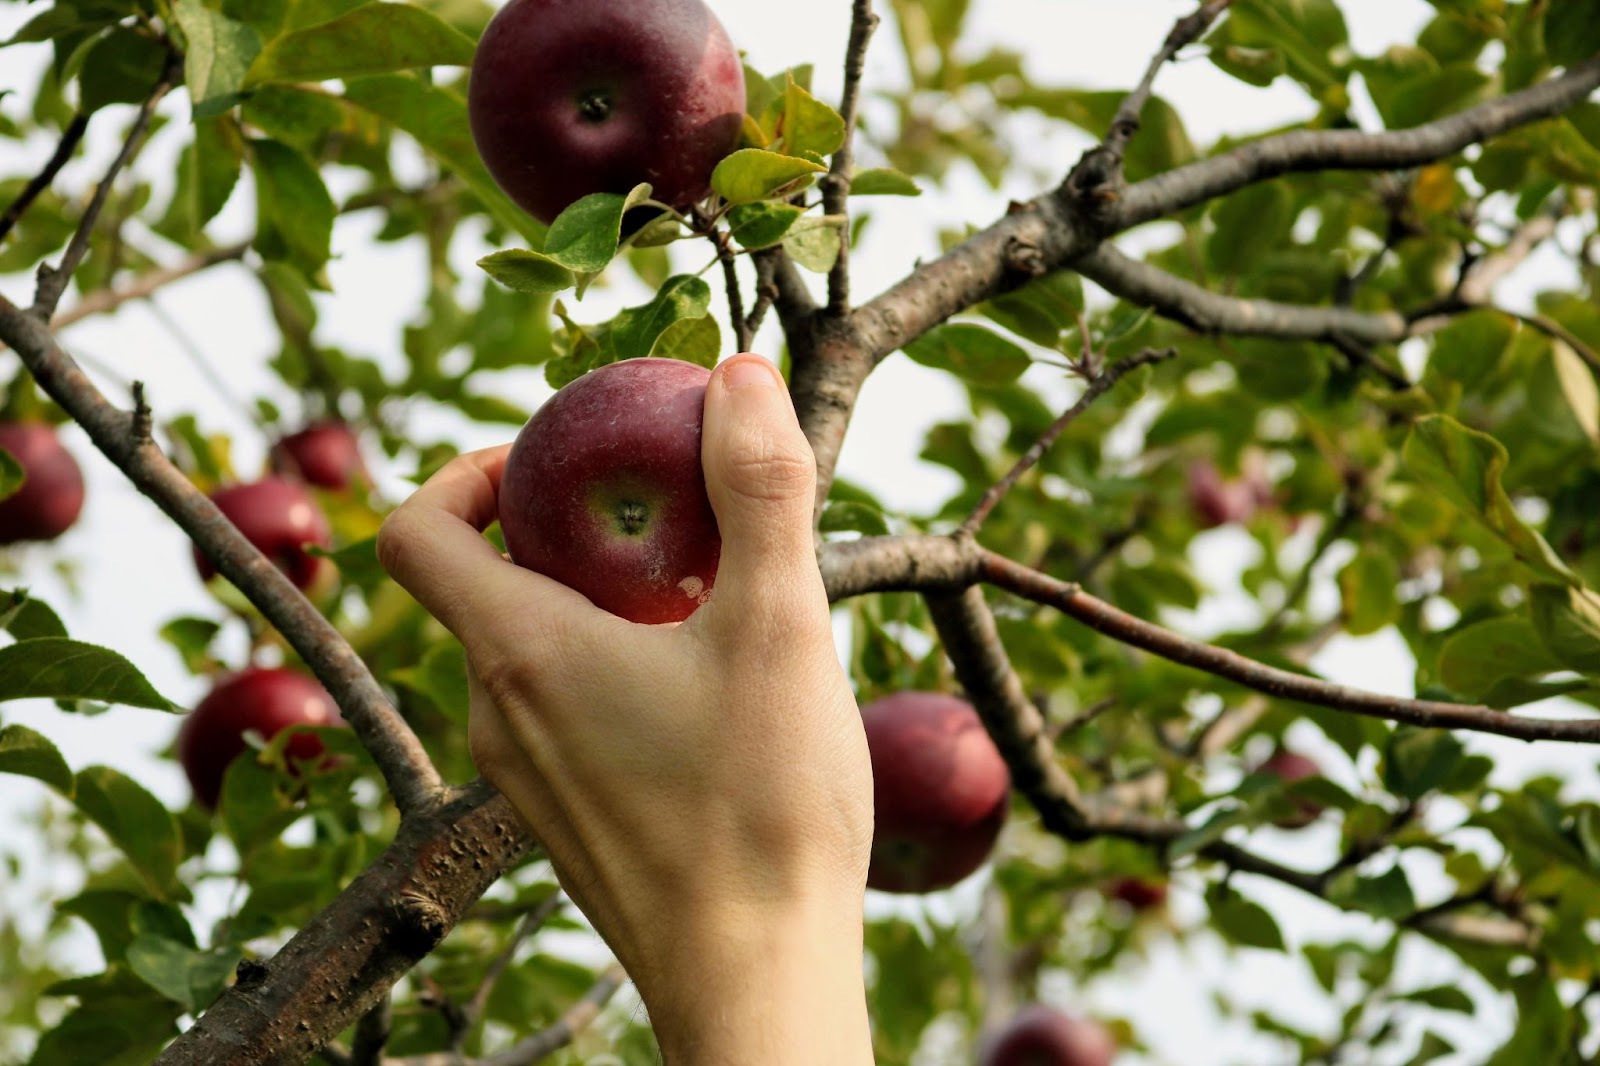 Shot of a hand picking an apple from a tree